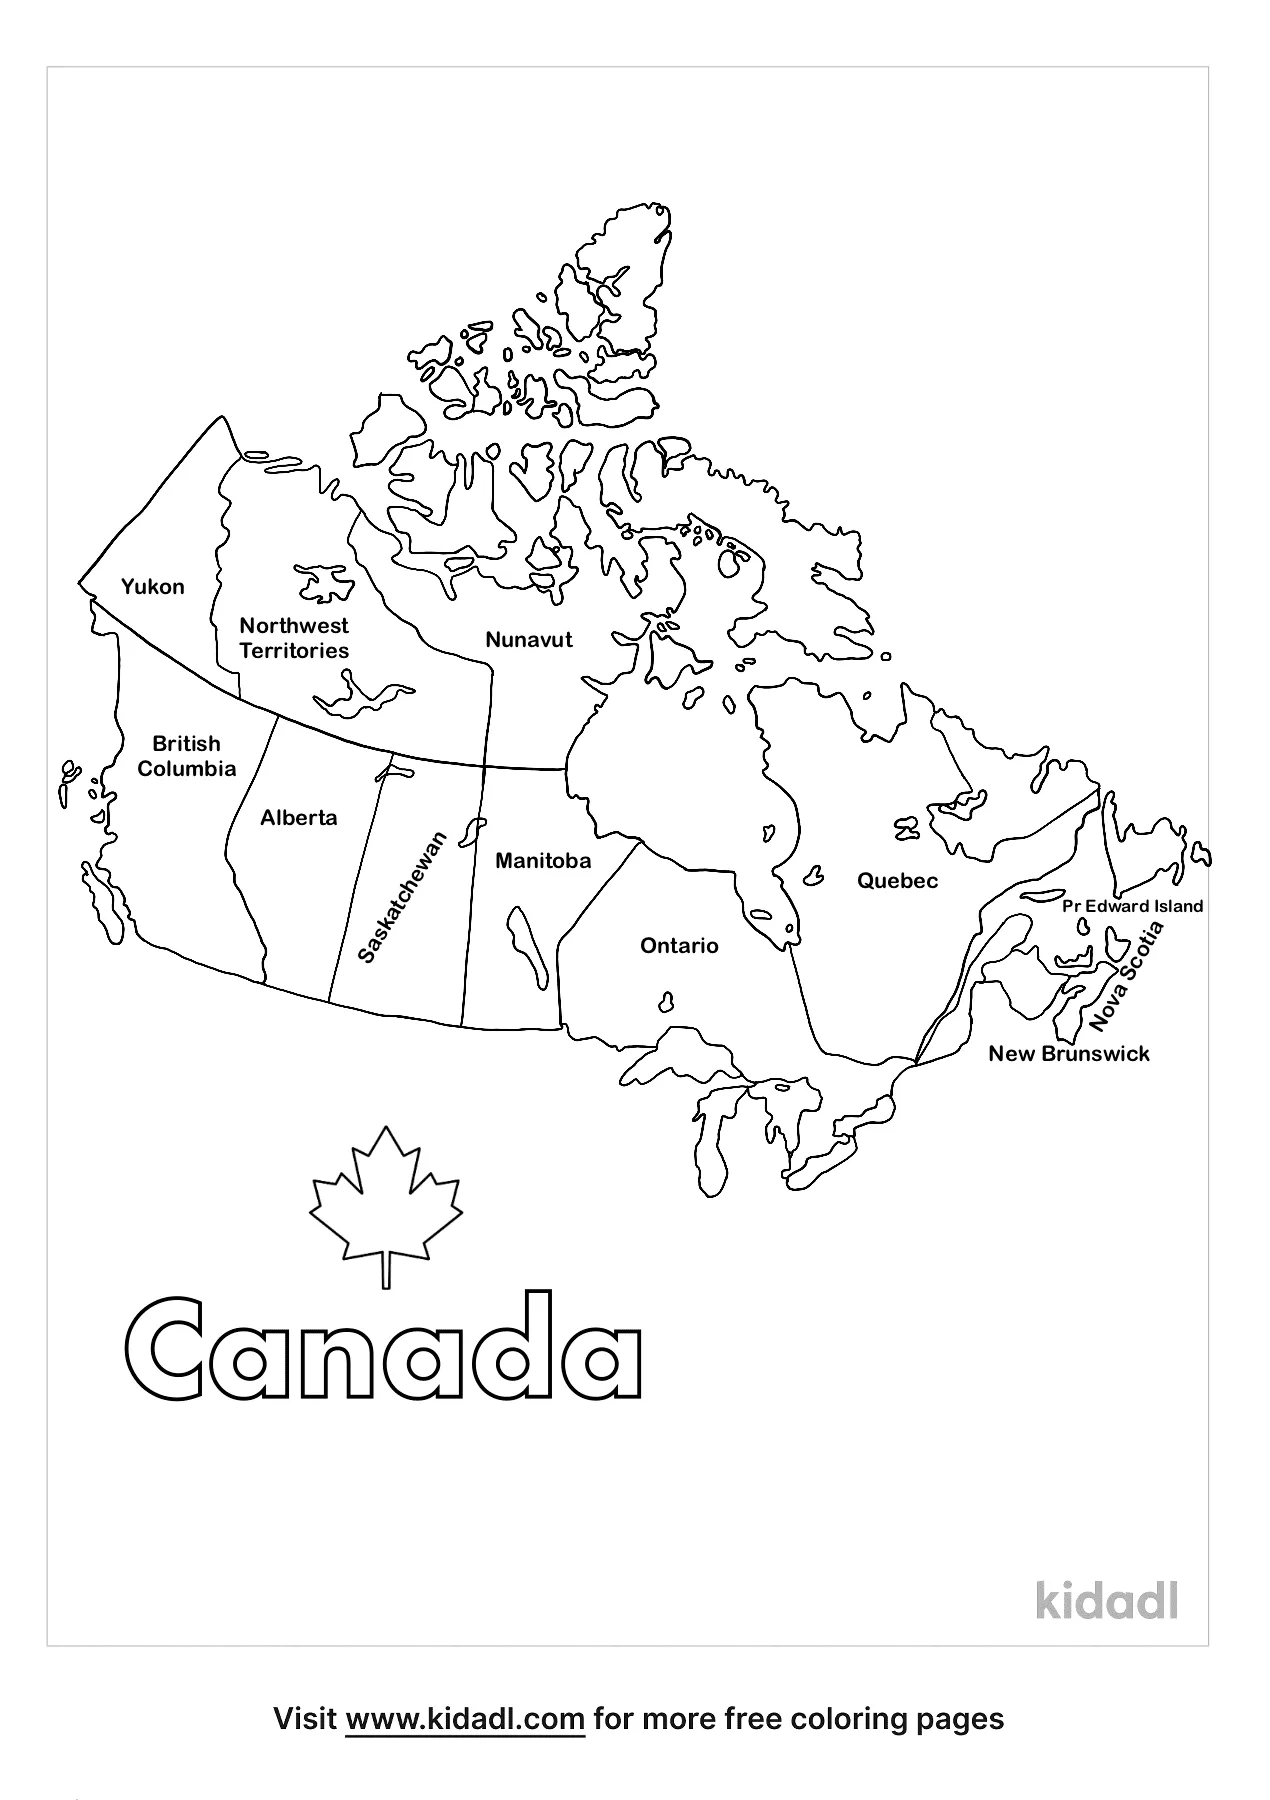 Free canada map coloring page coloring page printables